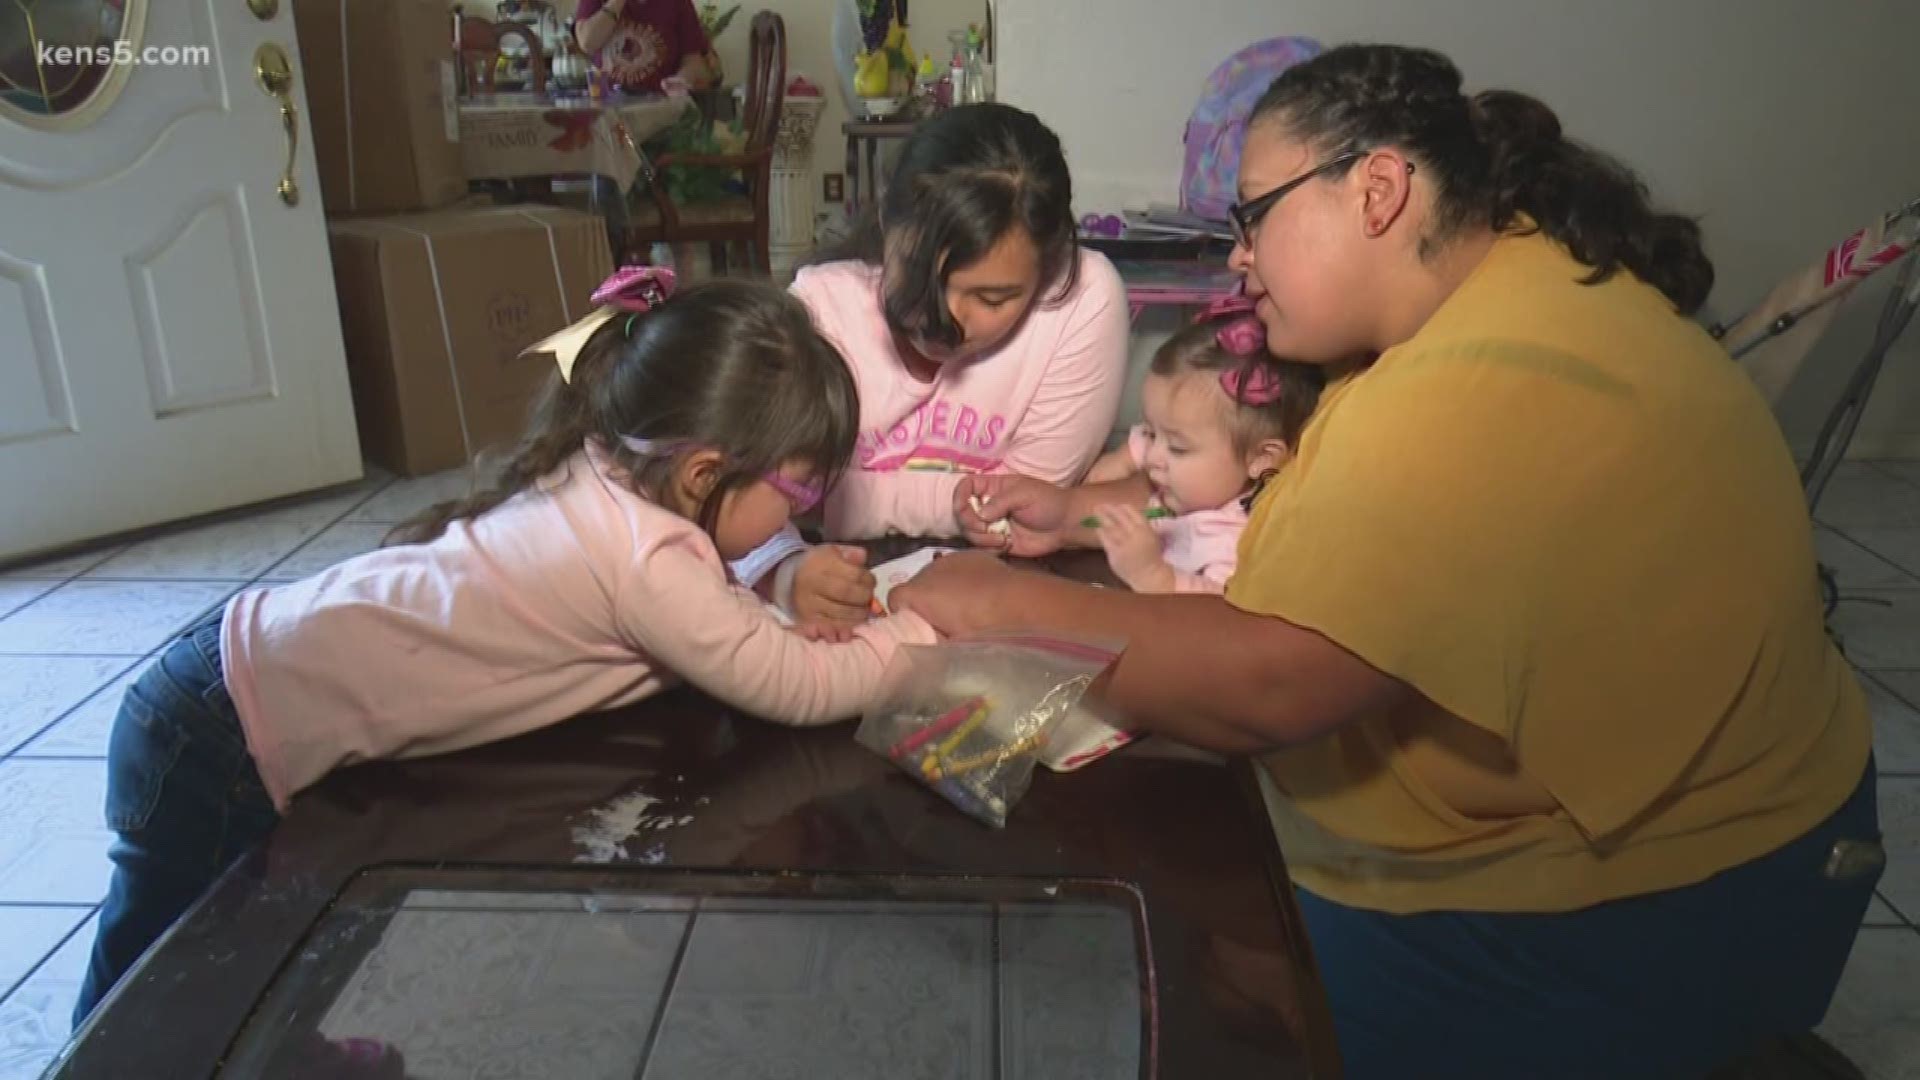 For the past year, this mom has been in the Bexar County family drug court. The program helps parents recover from addiction and reunite them with their children.